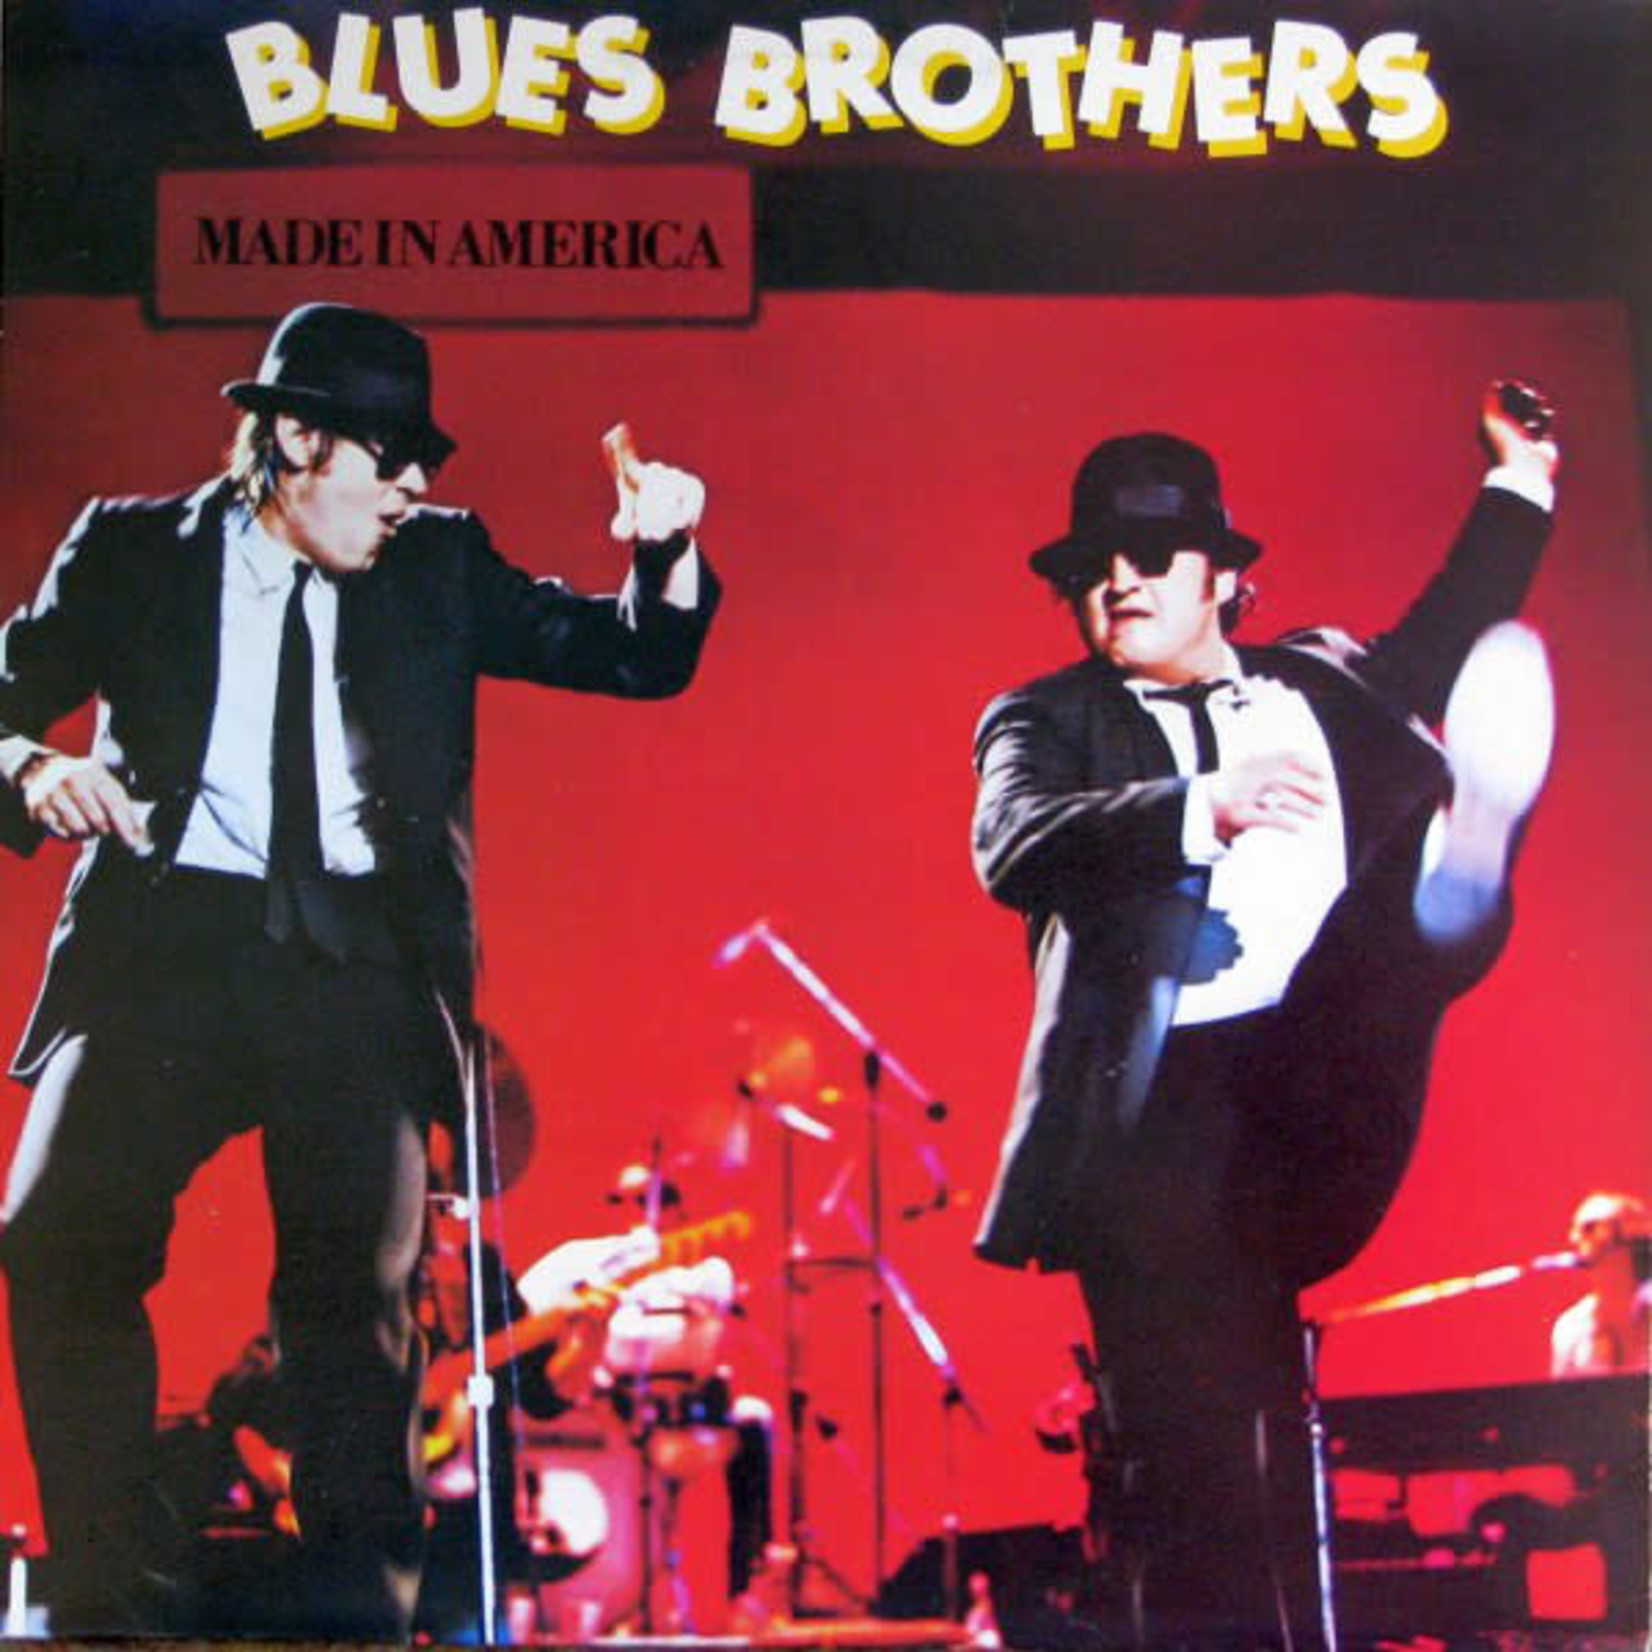 The Blues Brothers The Blues Brothers – Made In America (VG, 1980, LP, Atlantic – SD 16025) SCAZ